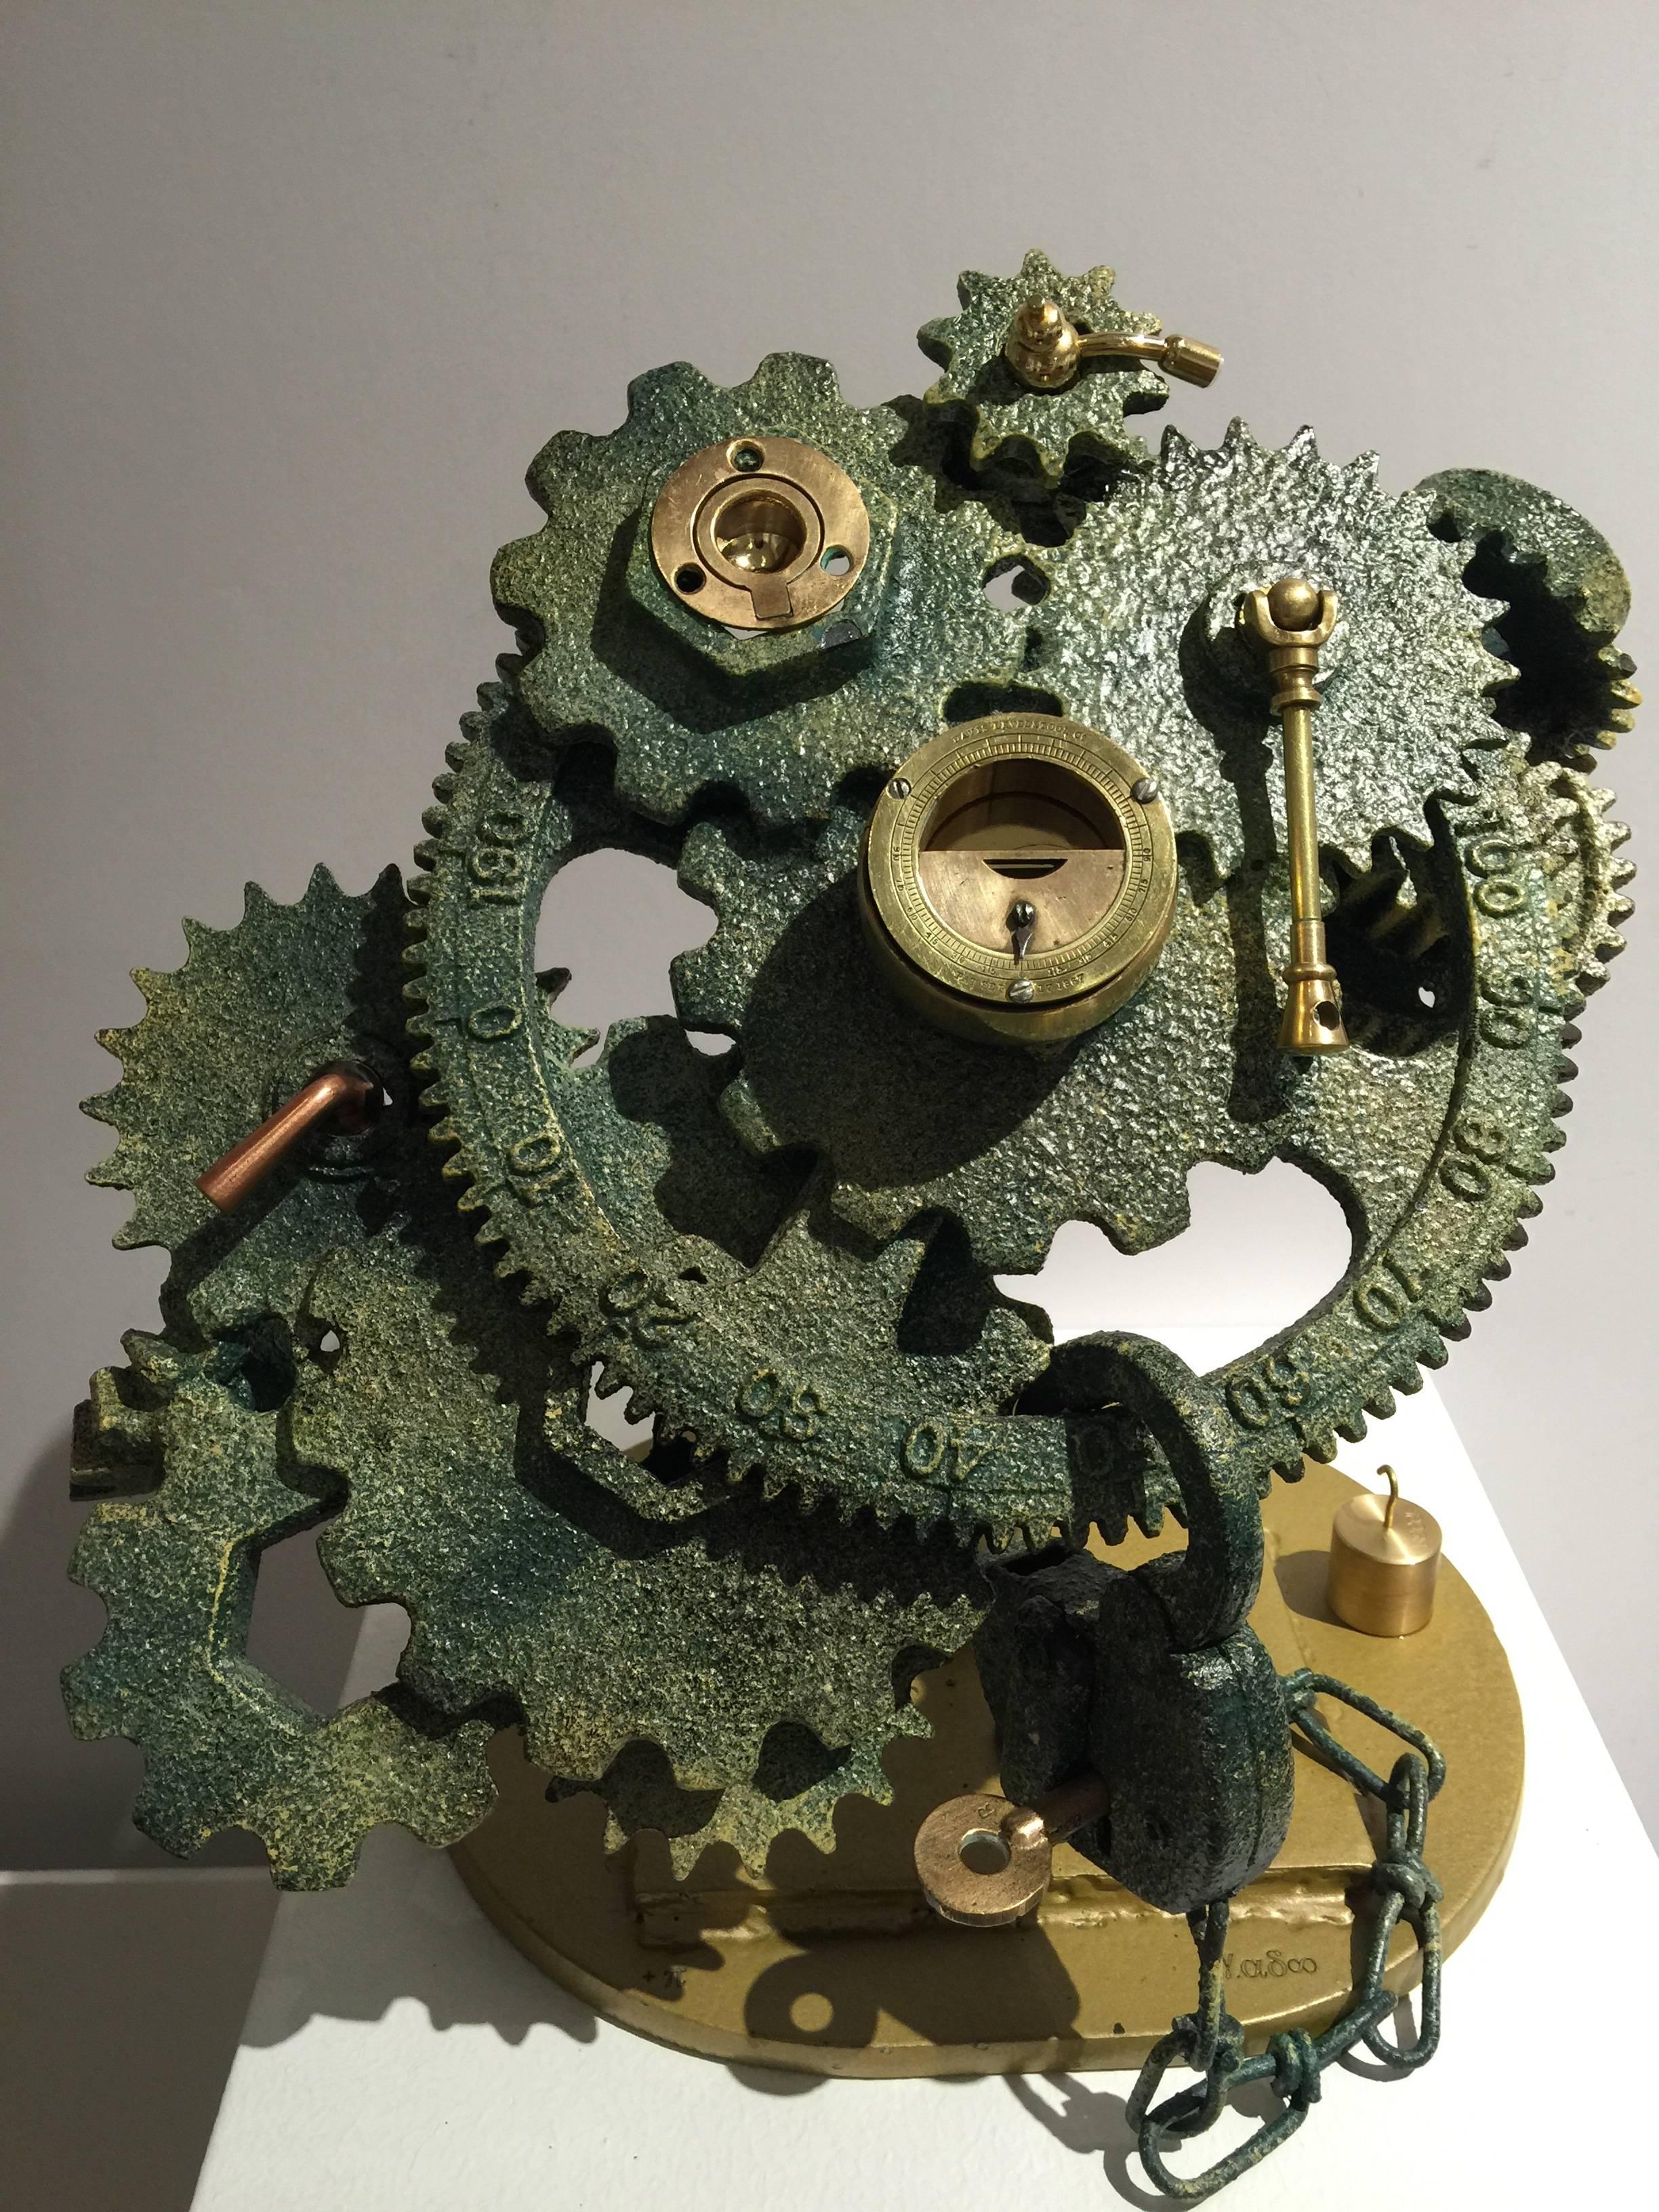 Terry Poulos Abstract Sculpture - Art-ikythera Mechanism